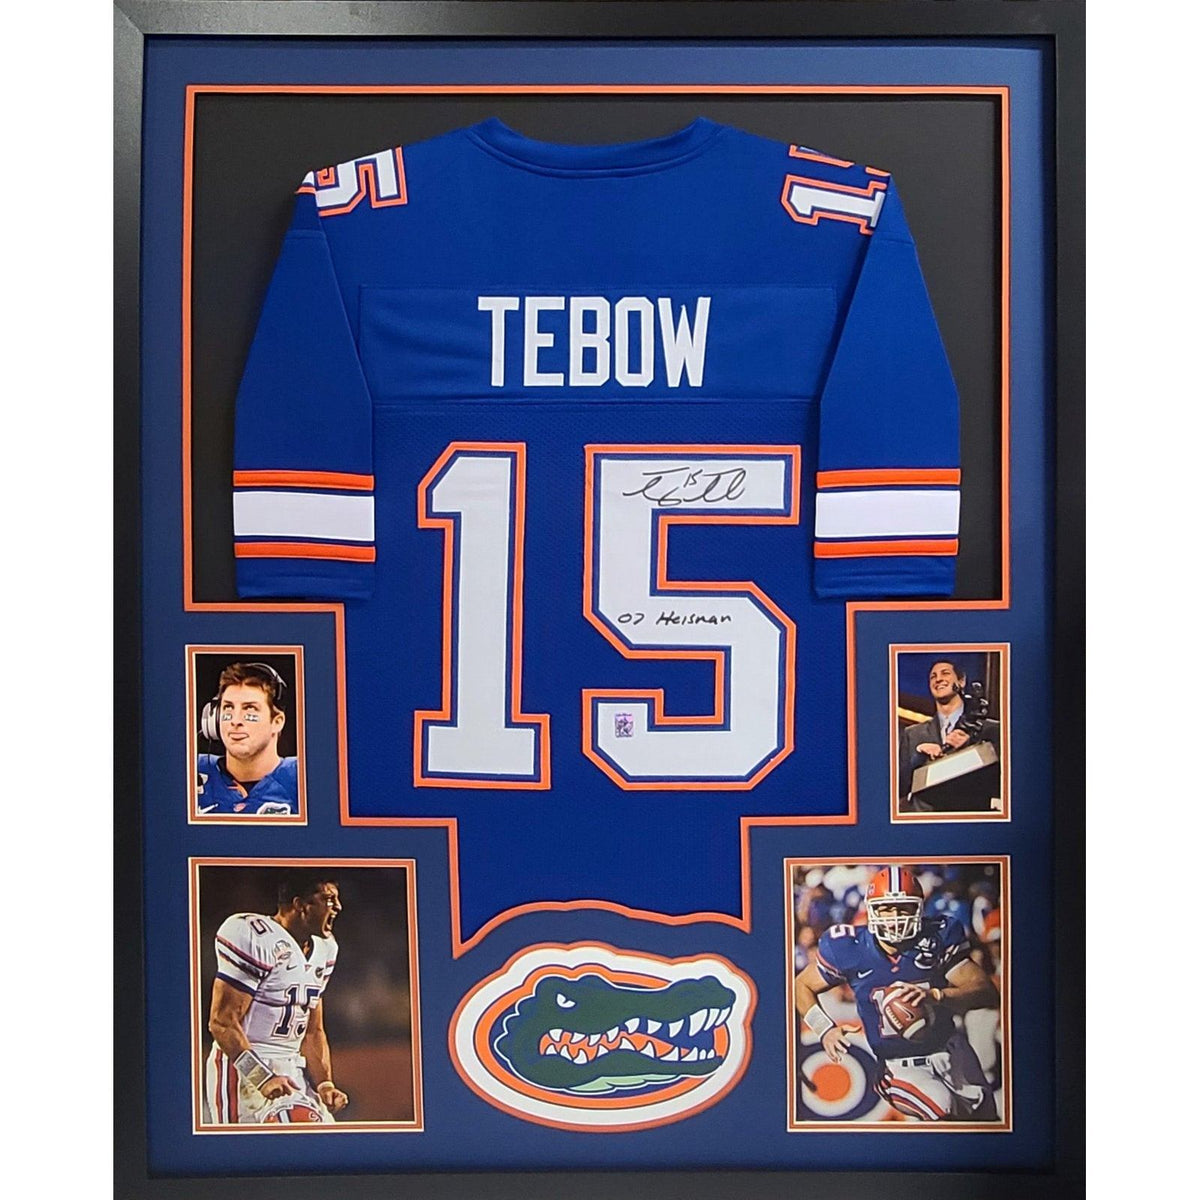 Charitybuzz: Tim Tebow Signed Florida Gators Jersey with Inscription